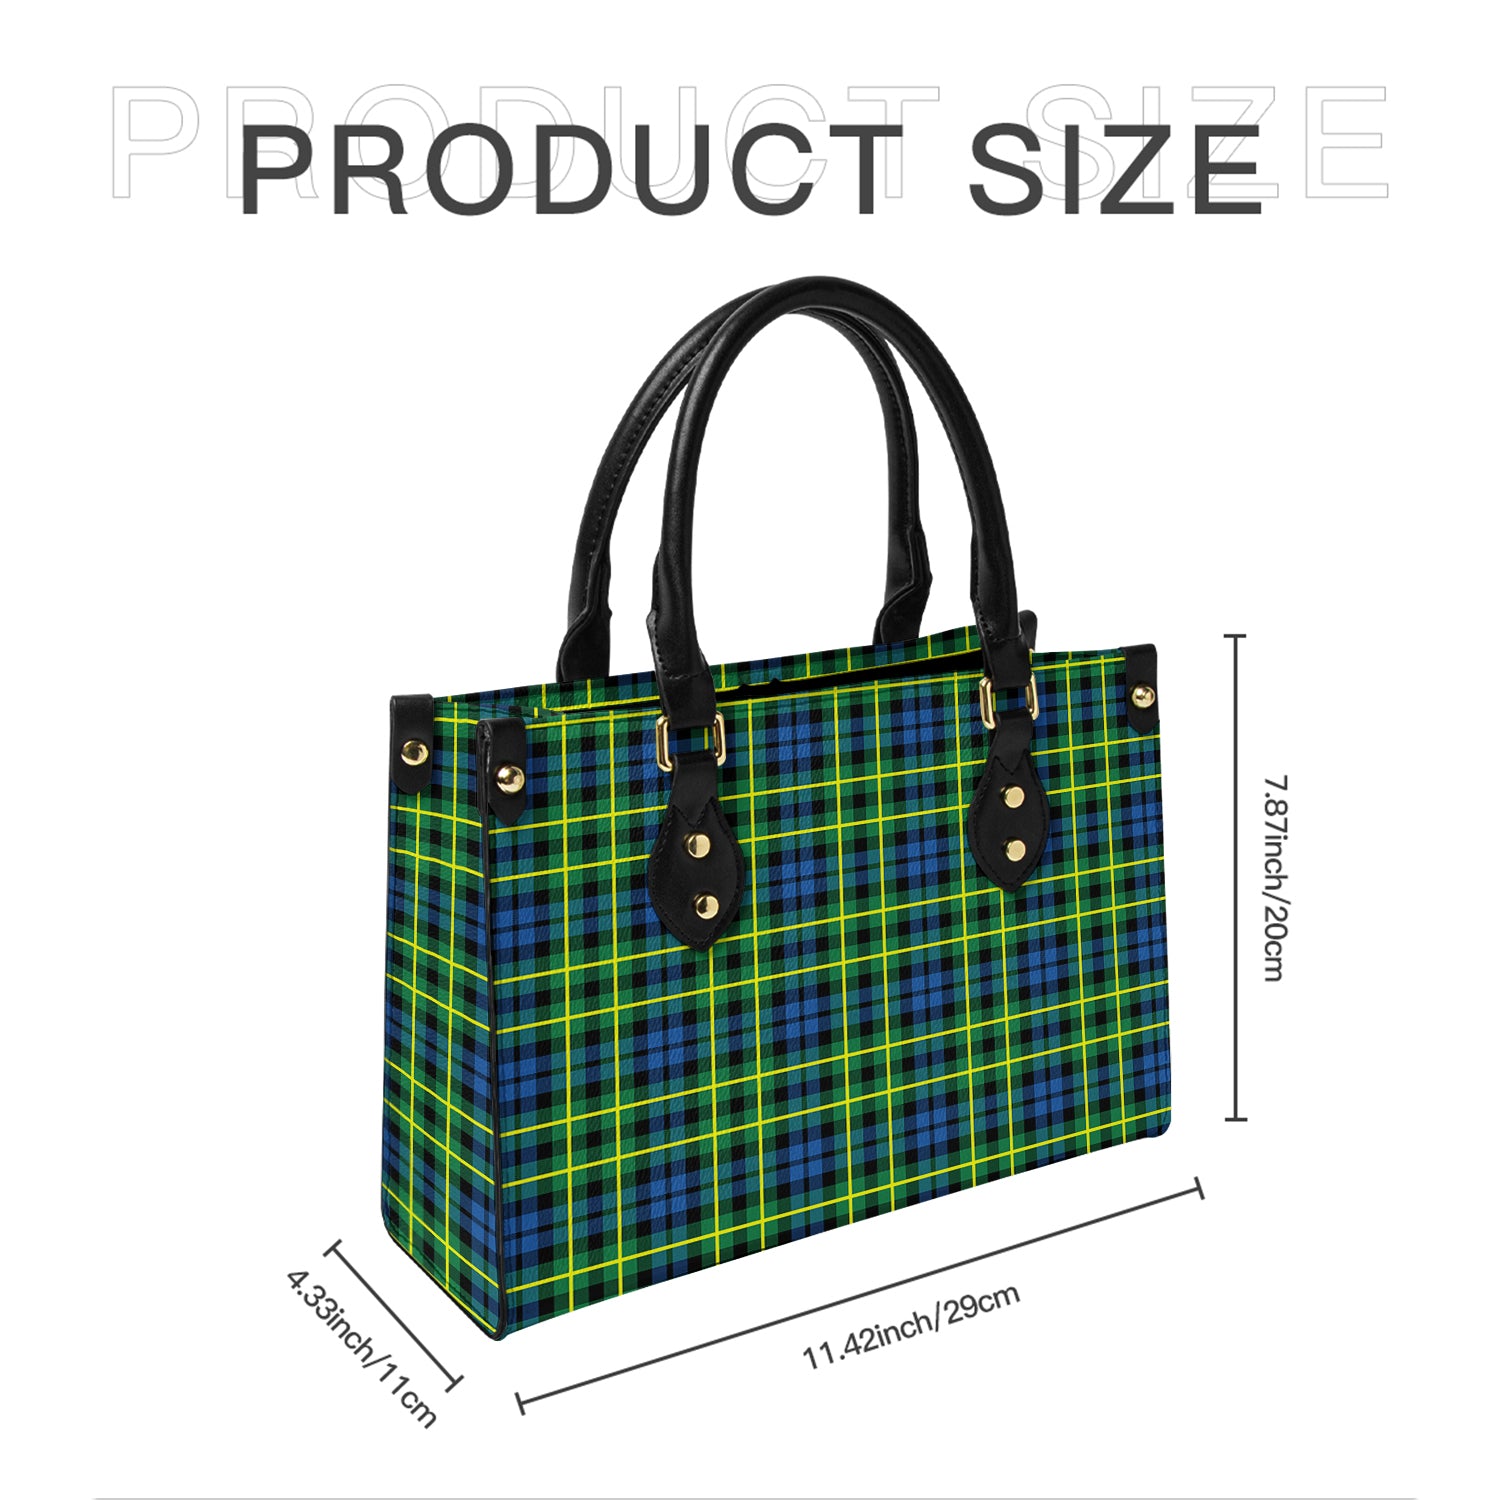 campbell-of-breadalbane-ancient-tartan-leather-bag